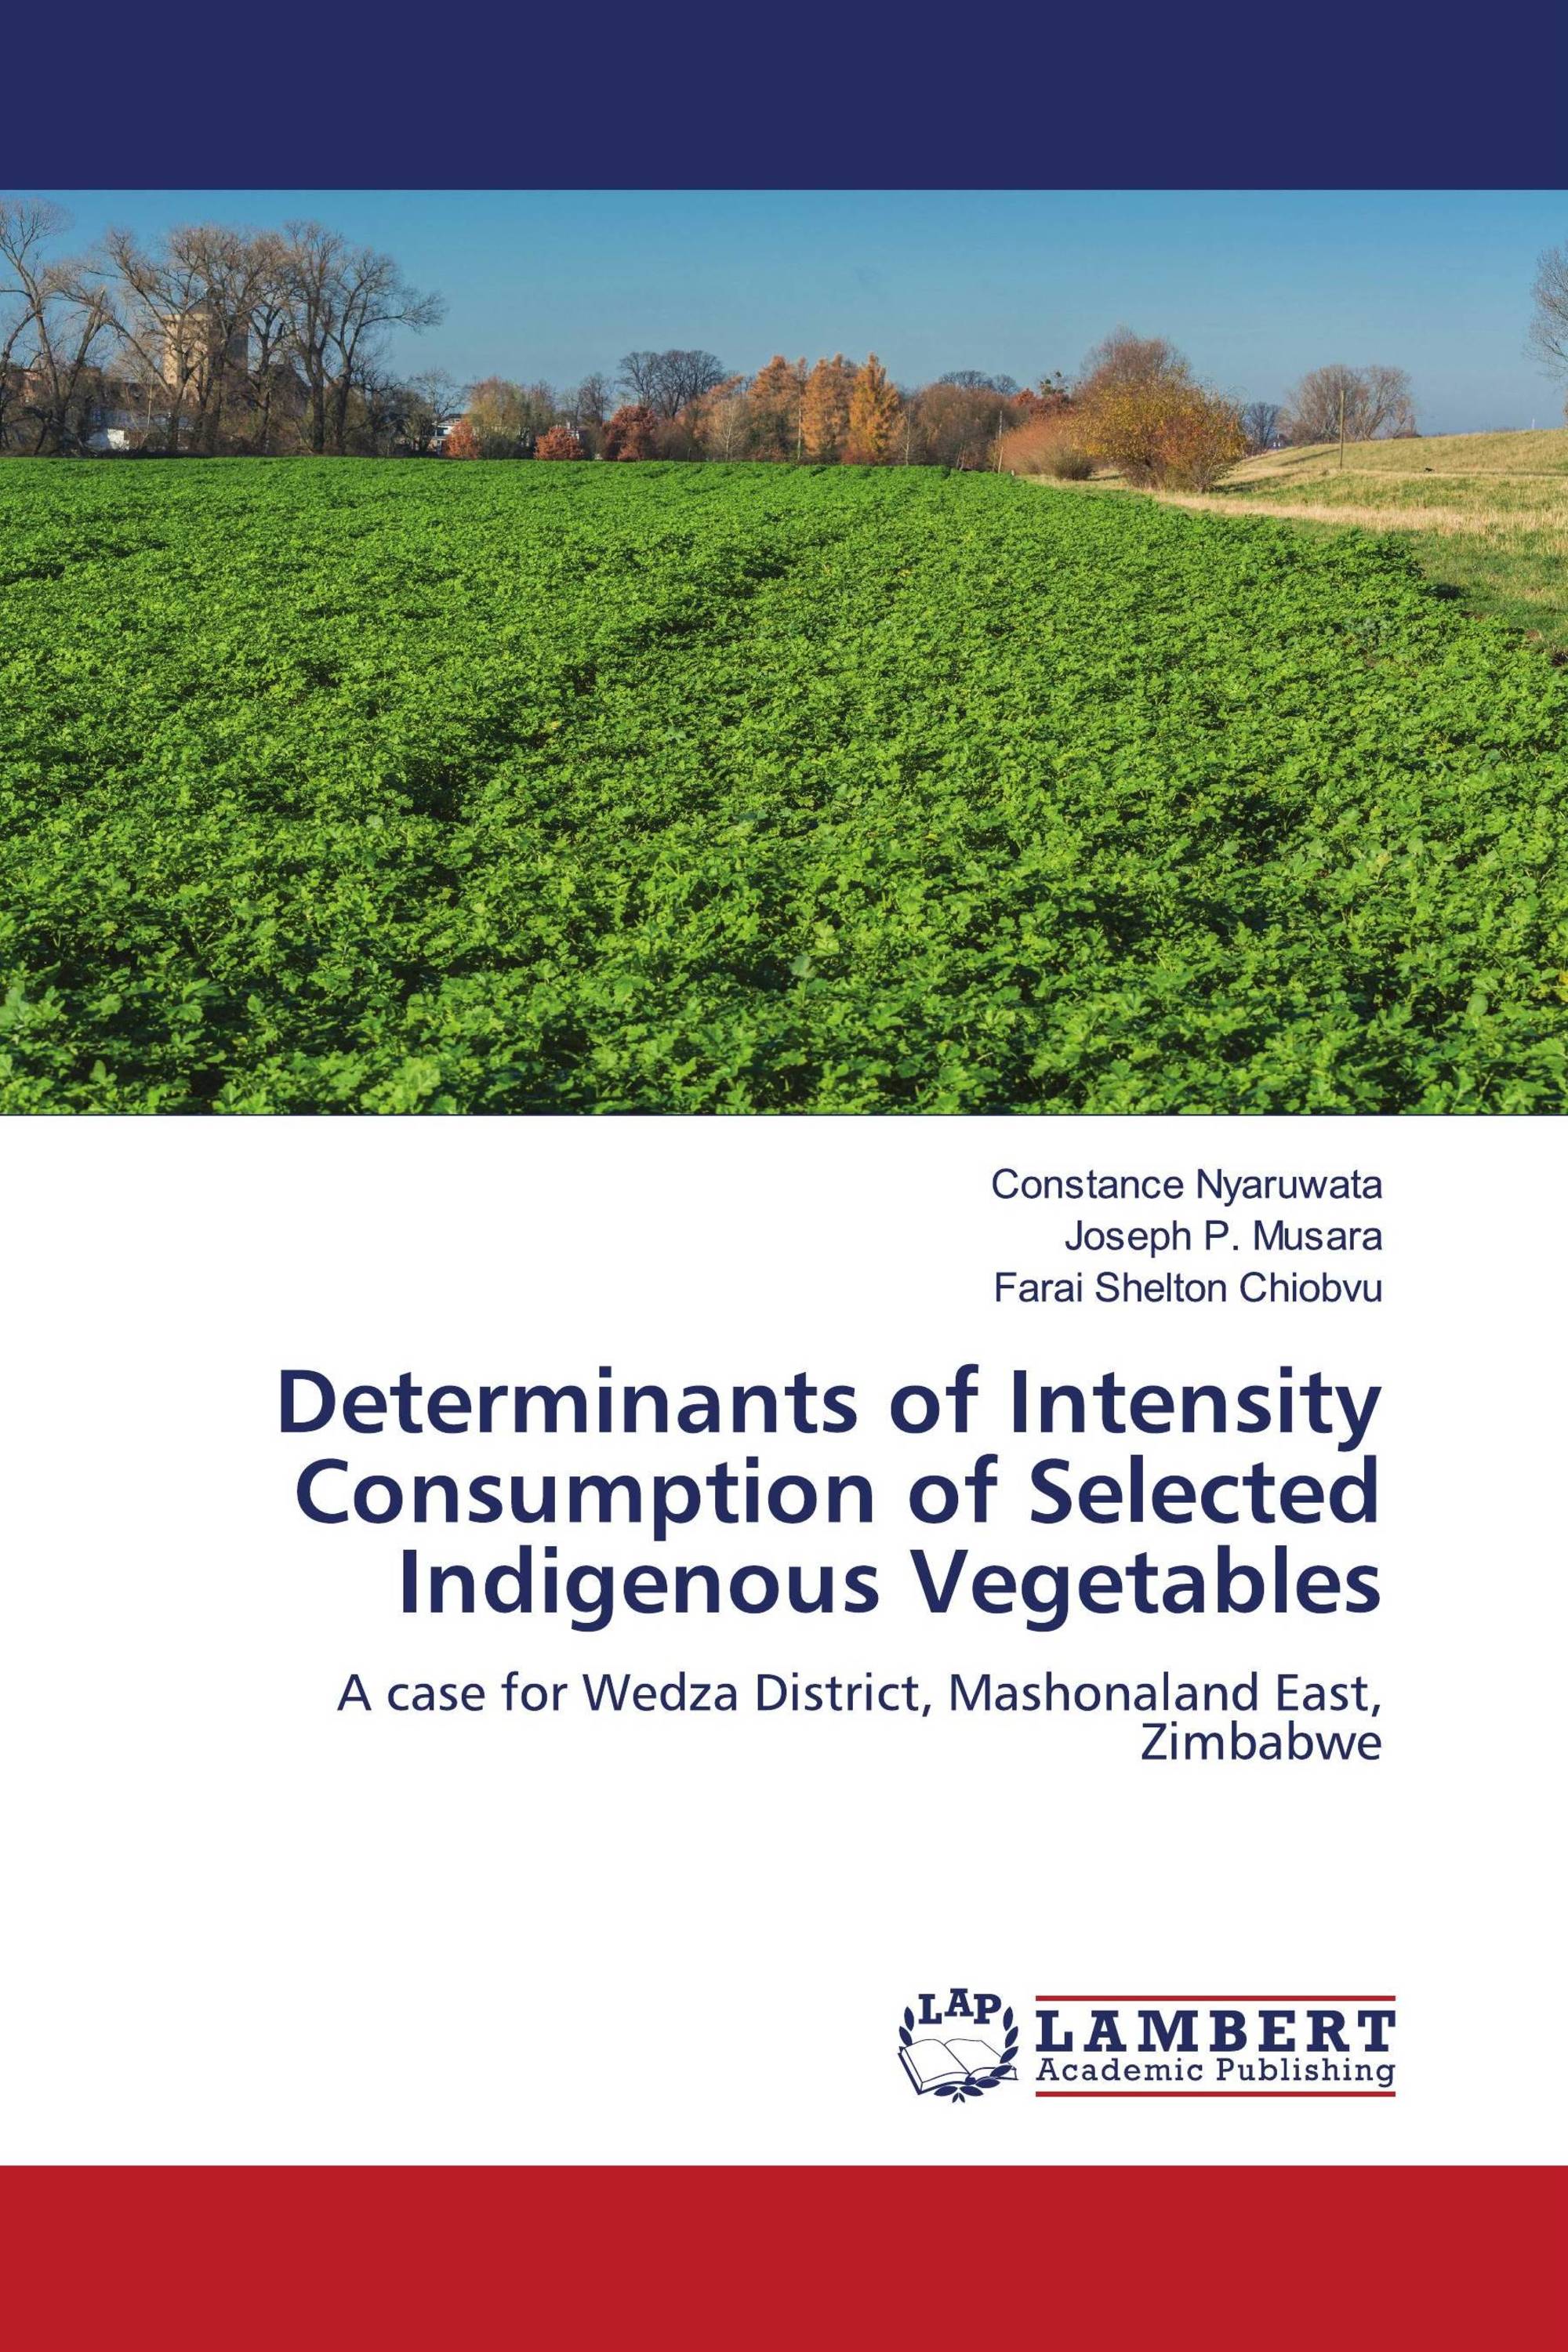 Determinants of Intensity Consumption of Selected Indigenous Vegetables